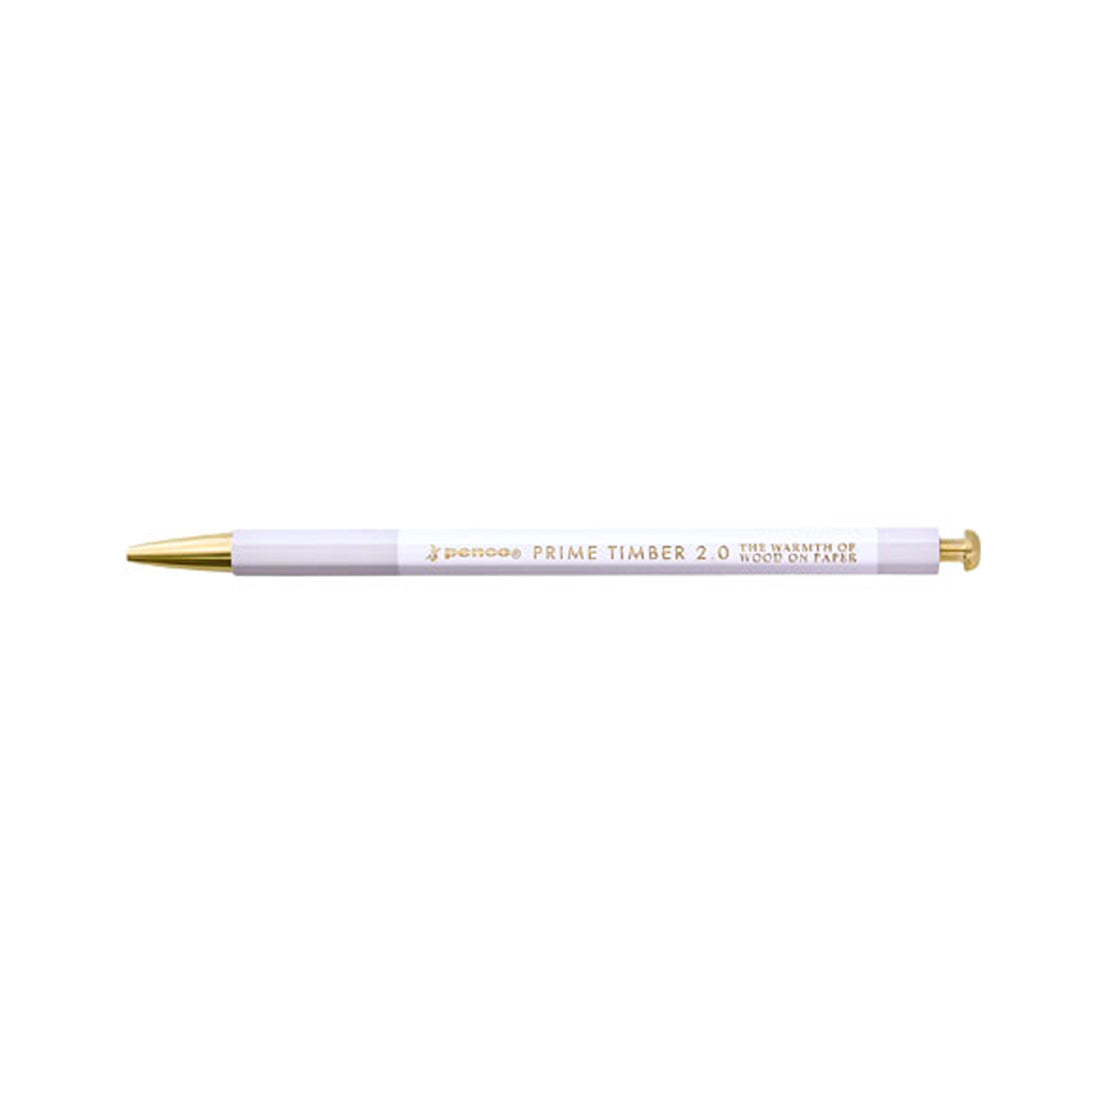 WHITE BRASS PRIME TIMBER 2.0 MECHANICAL PENCIL